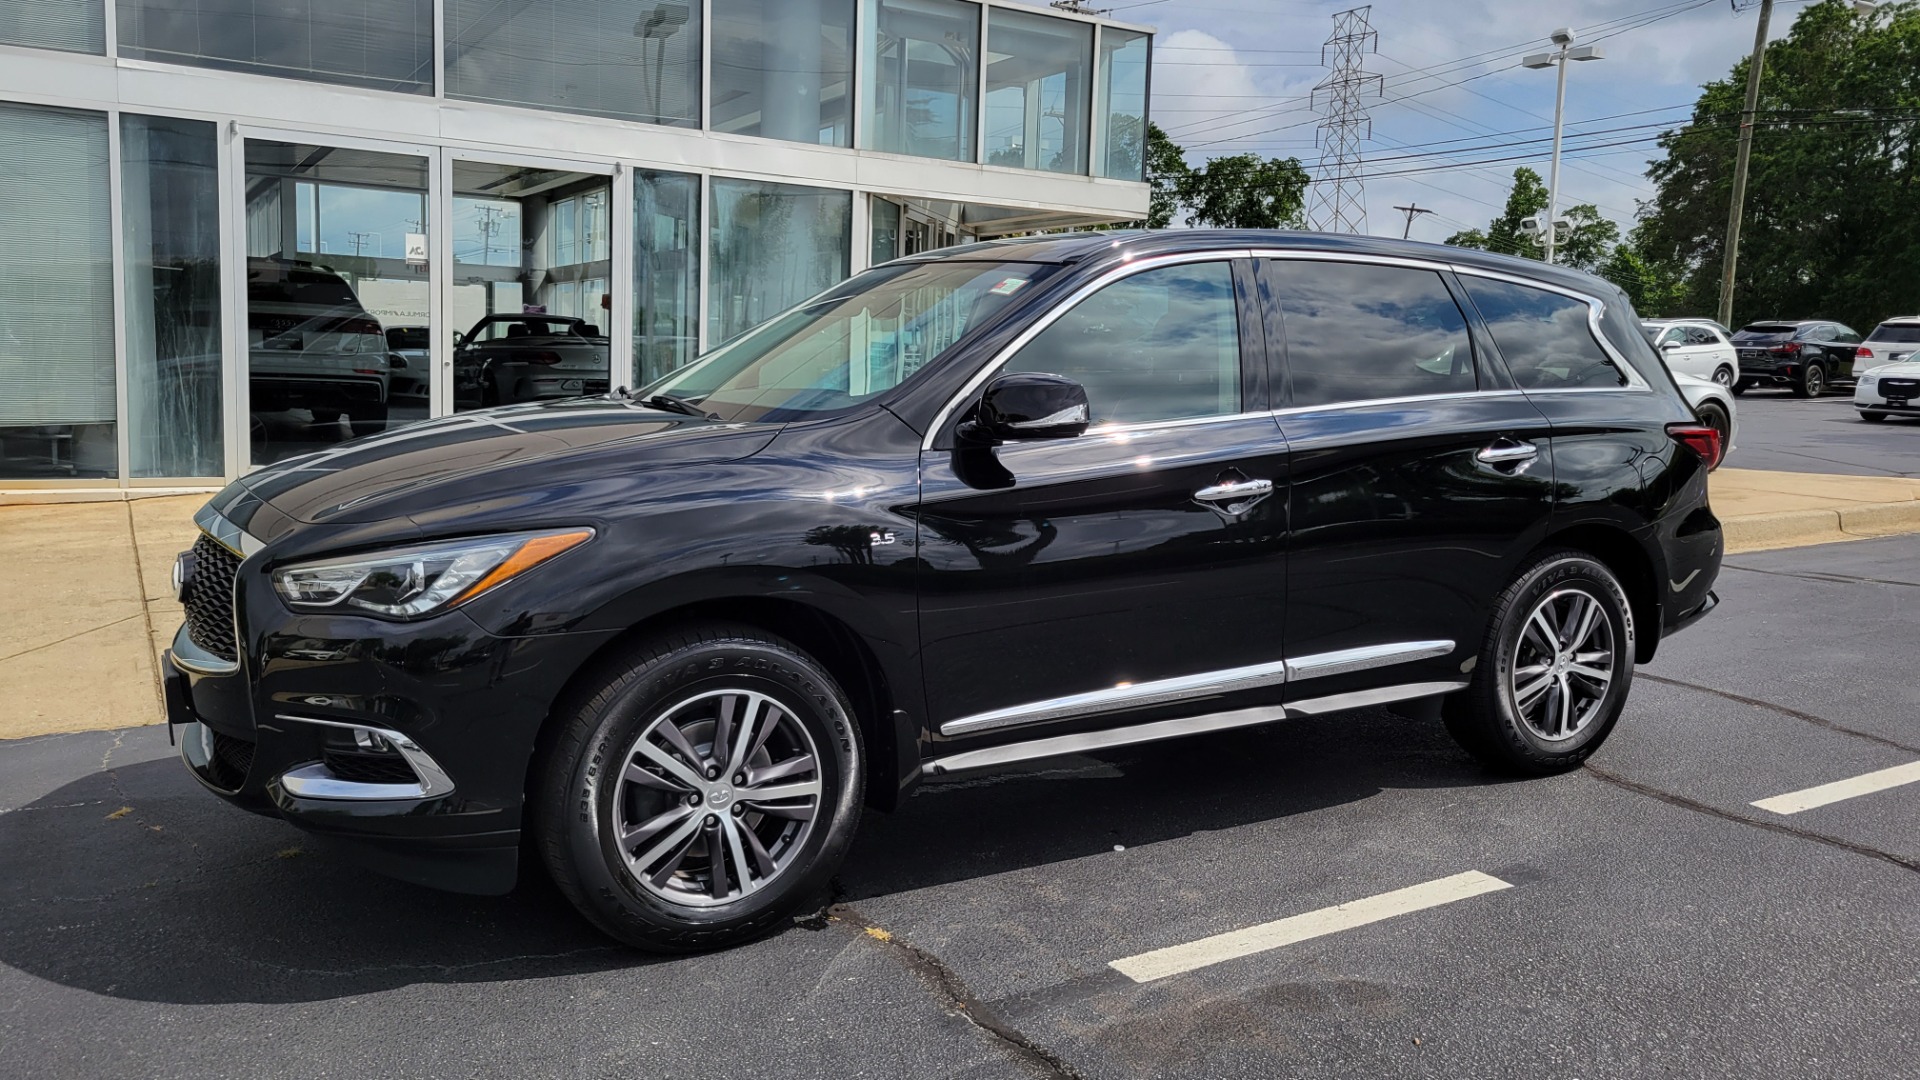 Used 2019 INFINITI QX60 PURE 3.5L / AWD / NAV / SUNROOF / 3-ROW / CAMERA for sale Sold at Formula Imports in Charlotte NC 28227 1